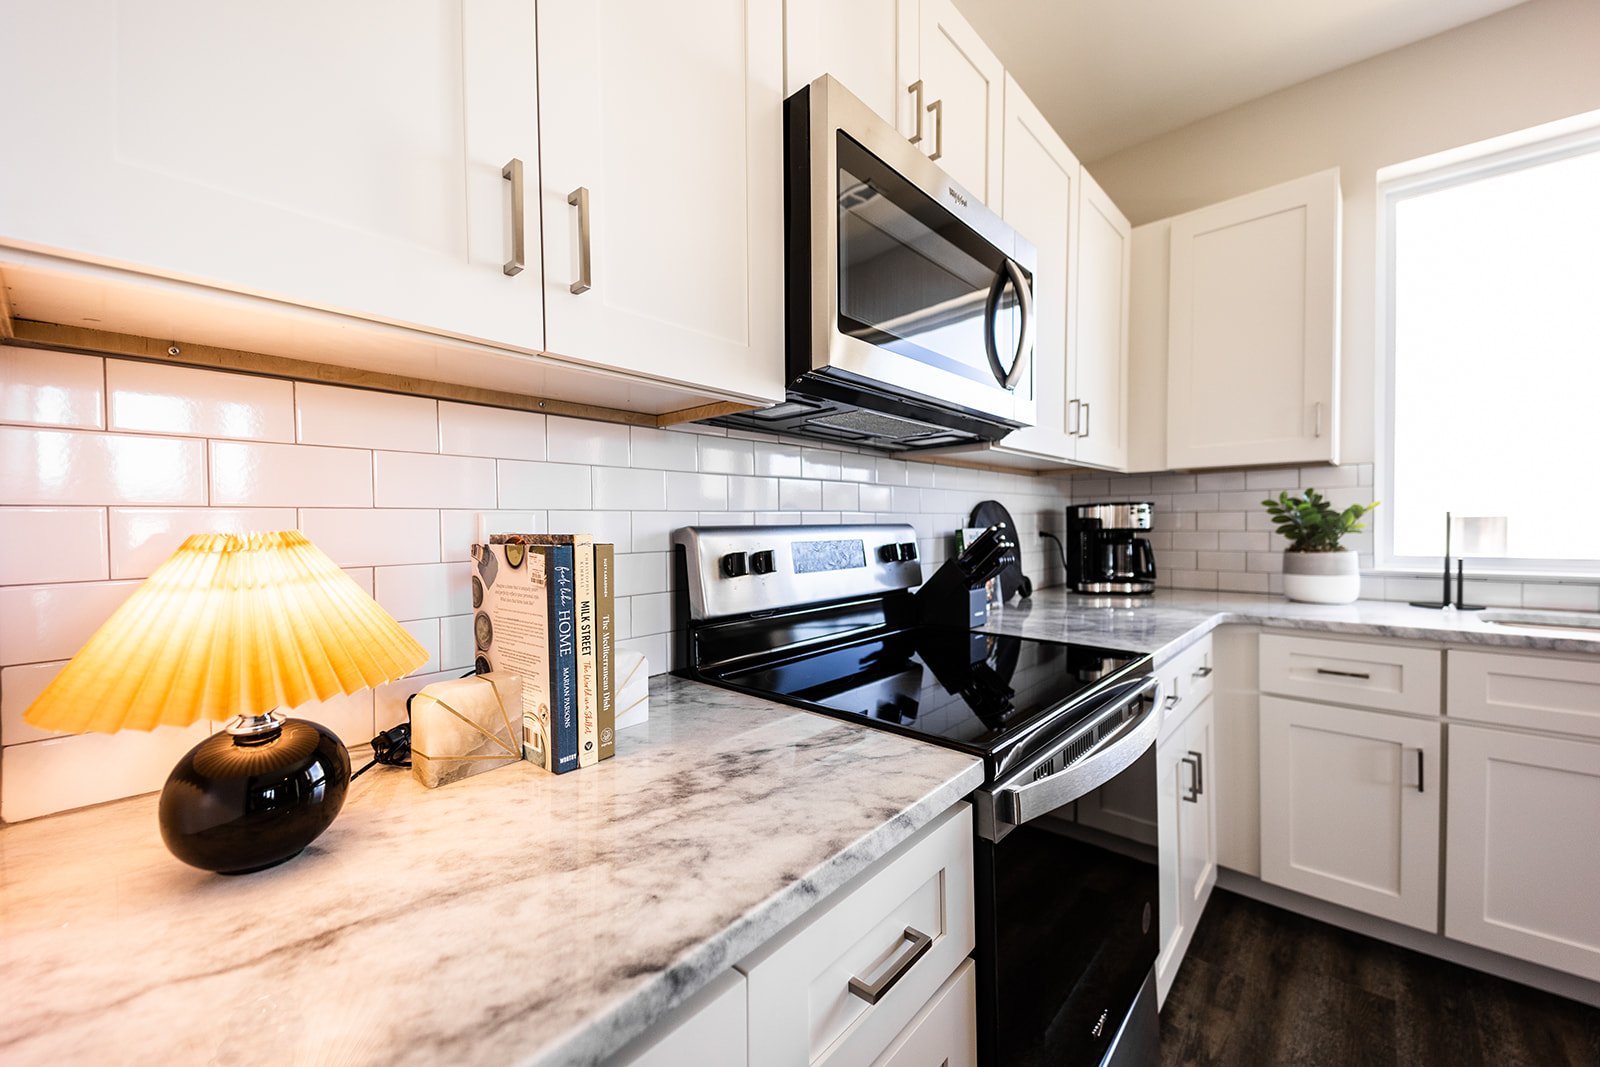 Fully equipped kitchen stocked with your basic cooking essentials. Complete with stainless steel appliances and breakfast bar seating.